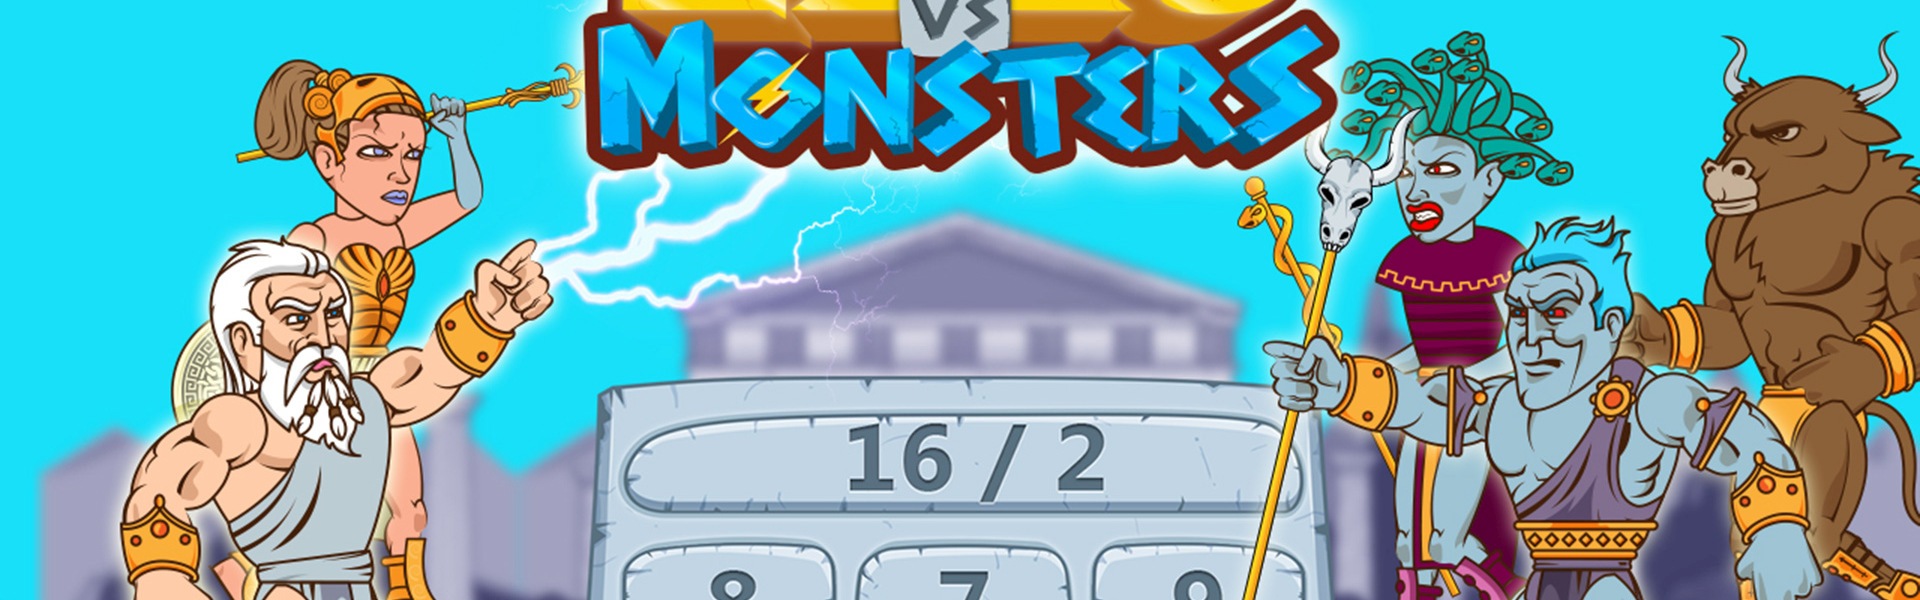 monster math games for free